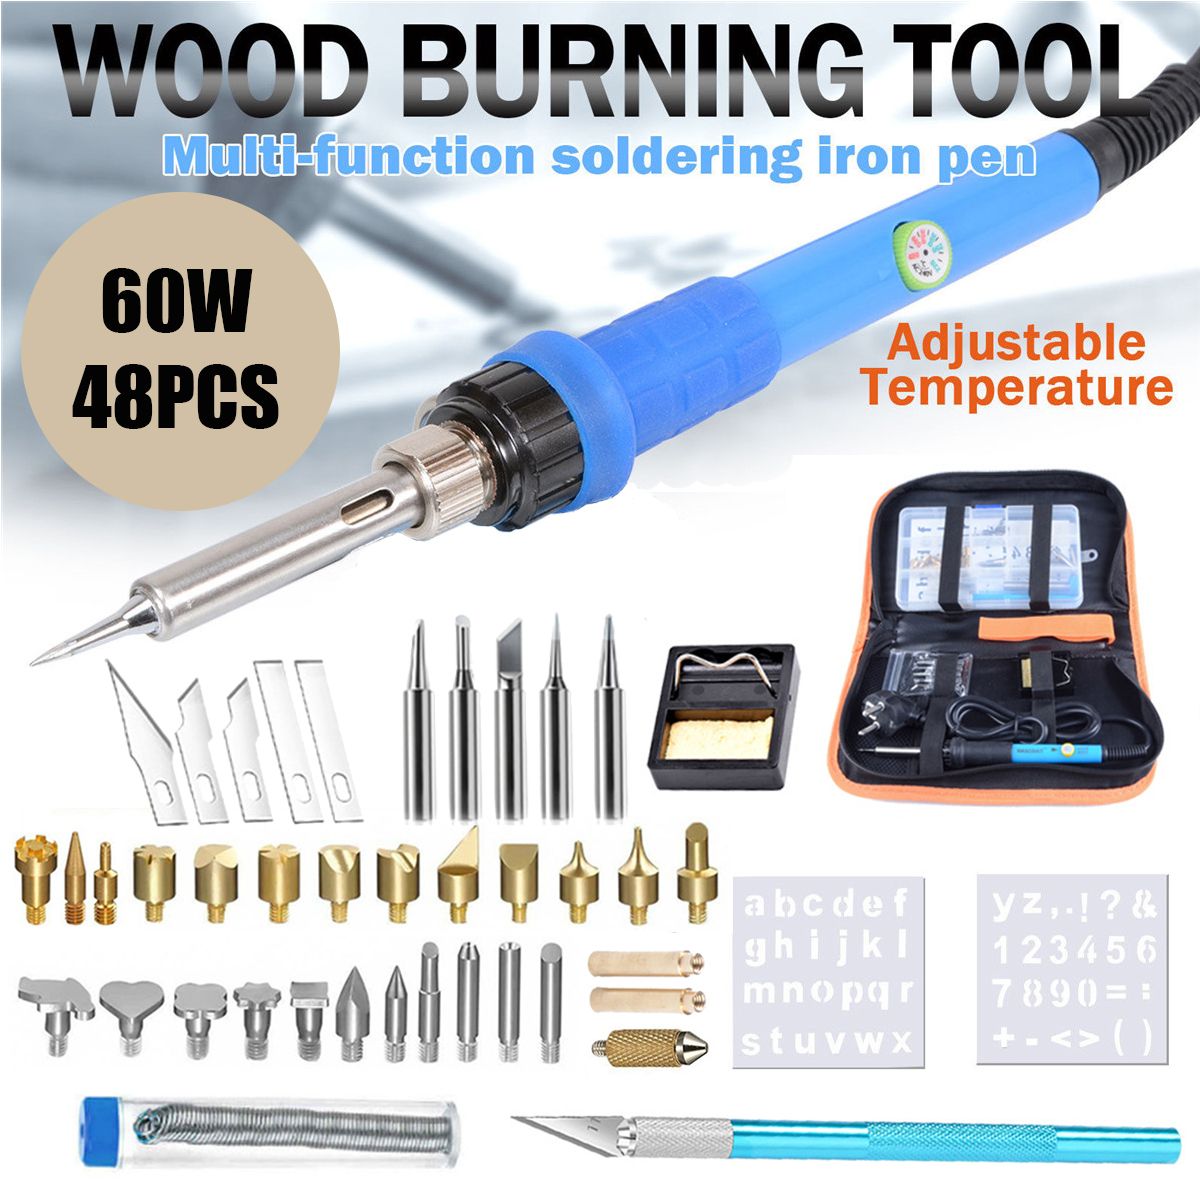 48Pcs-60W-110V220V-Adjustable-Temperature-Solder-Iron-Tool-Kit-Carving-Pyrography-Tool-Wood-Embossin-1370080